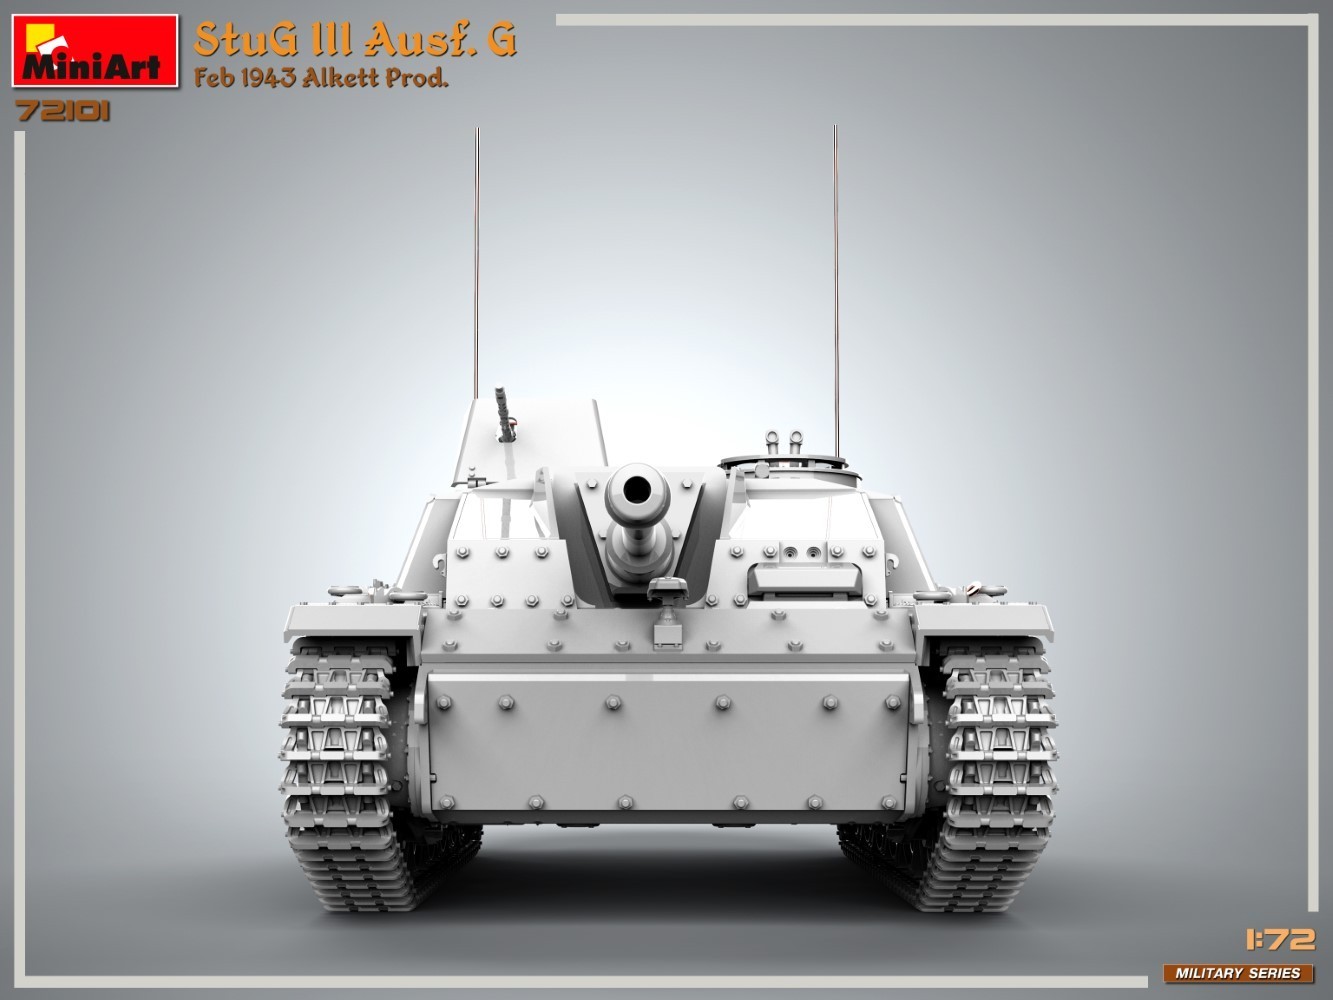 New Military Series Announced in 1/72 Scale, Starting with StuG III Ausf. G CAD-10